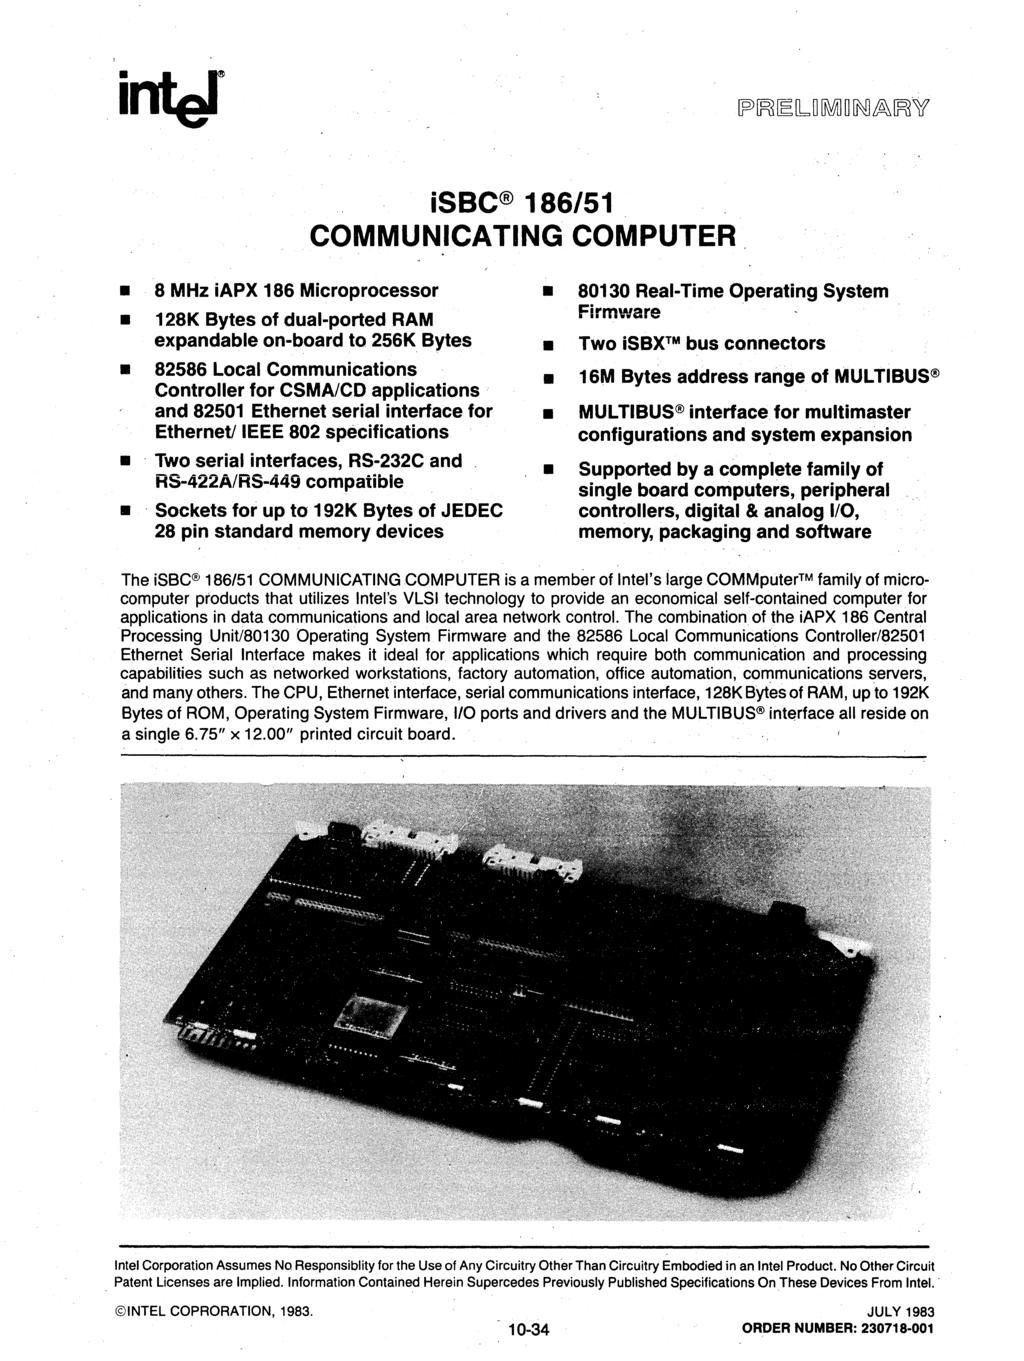 inter isbc 186/51 COMMUNCATNG COMPUTER, 8 MHz iapx 186 Microprocessor 128K Bytes of dual-ported RAM expandable on-board to 256K Bytes 82586 Local Communications Controller for CSMAlCD applications